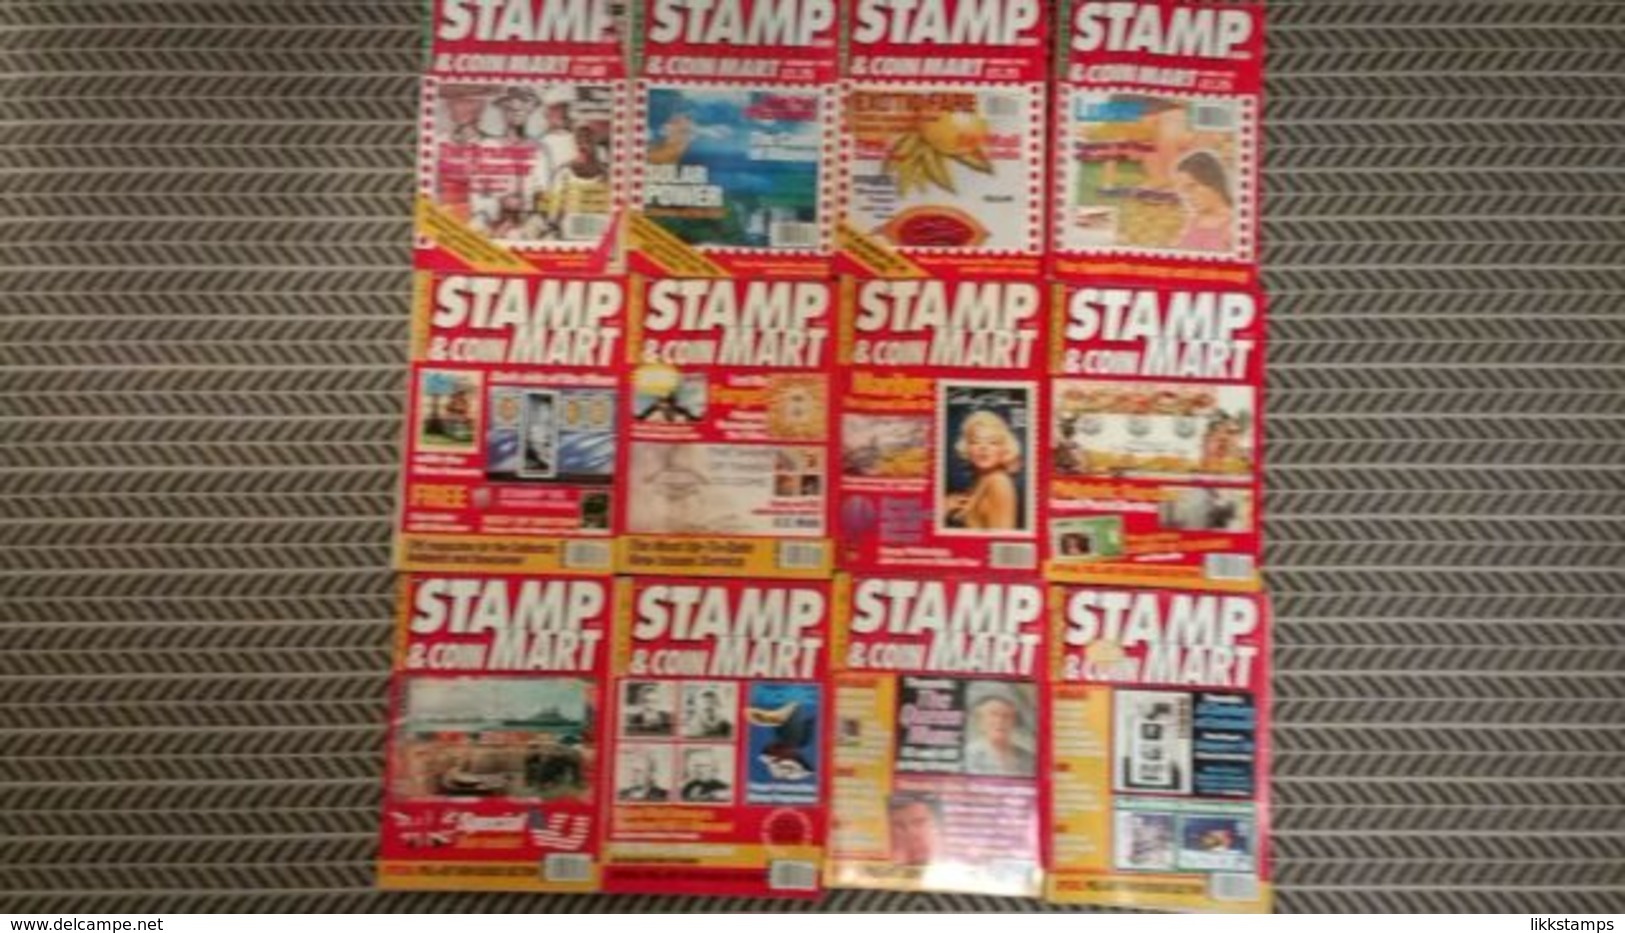 STAMP AND COIN MART MAGAZINE JANUARY 1995 TO DECEMBER 1995 #L0045 - Anglais (àpd. 1941)